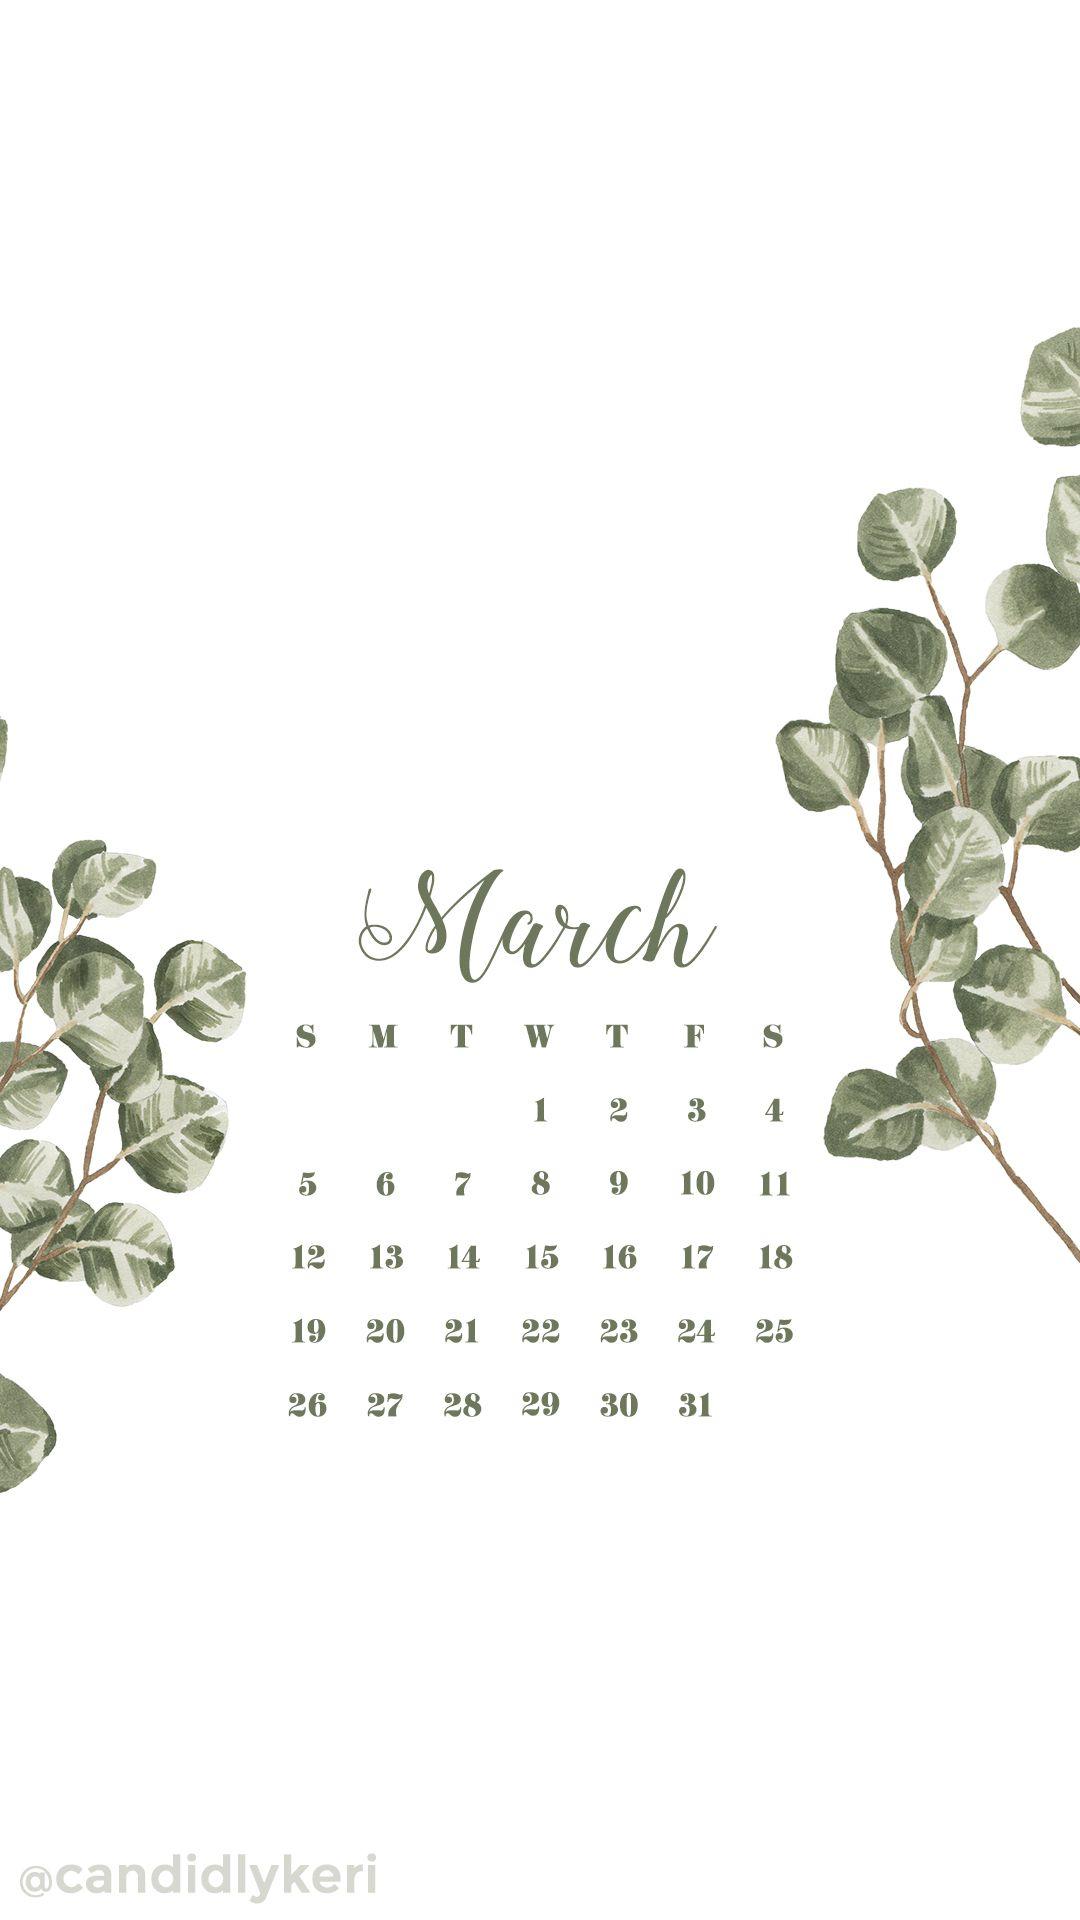 Phone wallpaper and calendar for March  Cathryn Worrell Art  Illustration